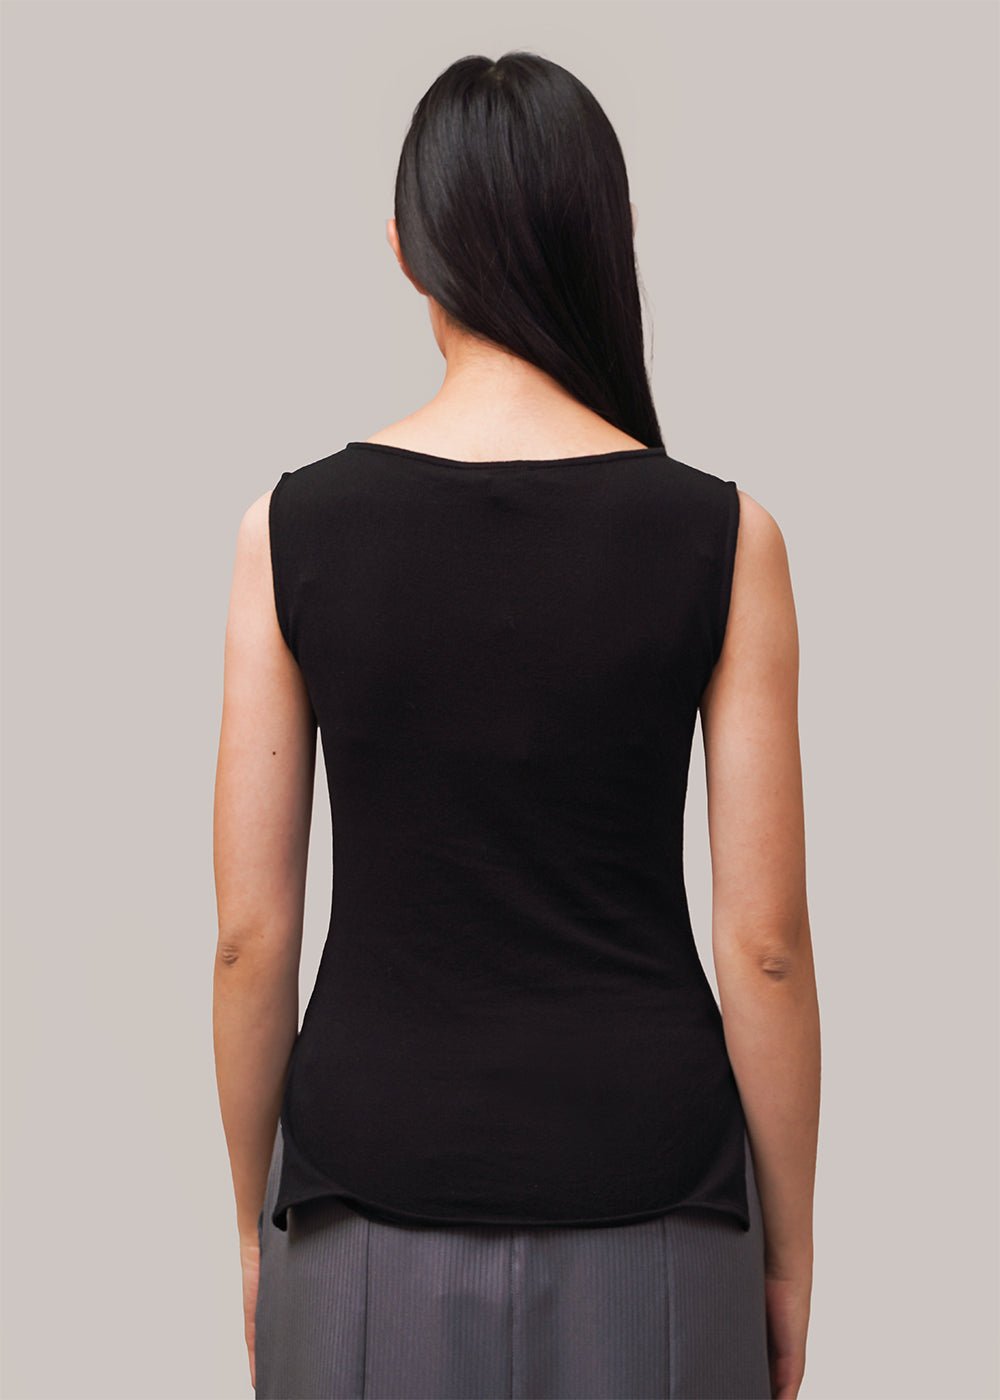 Permanent Vacation Black E-Meet Tank Top - New Classics Studios Sustainable Ethical Fashion Canada